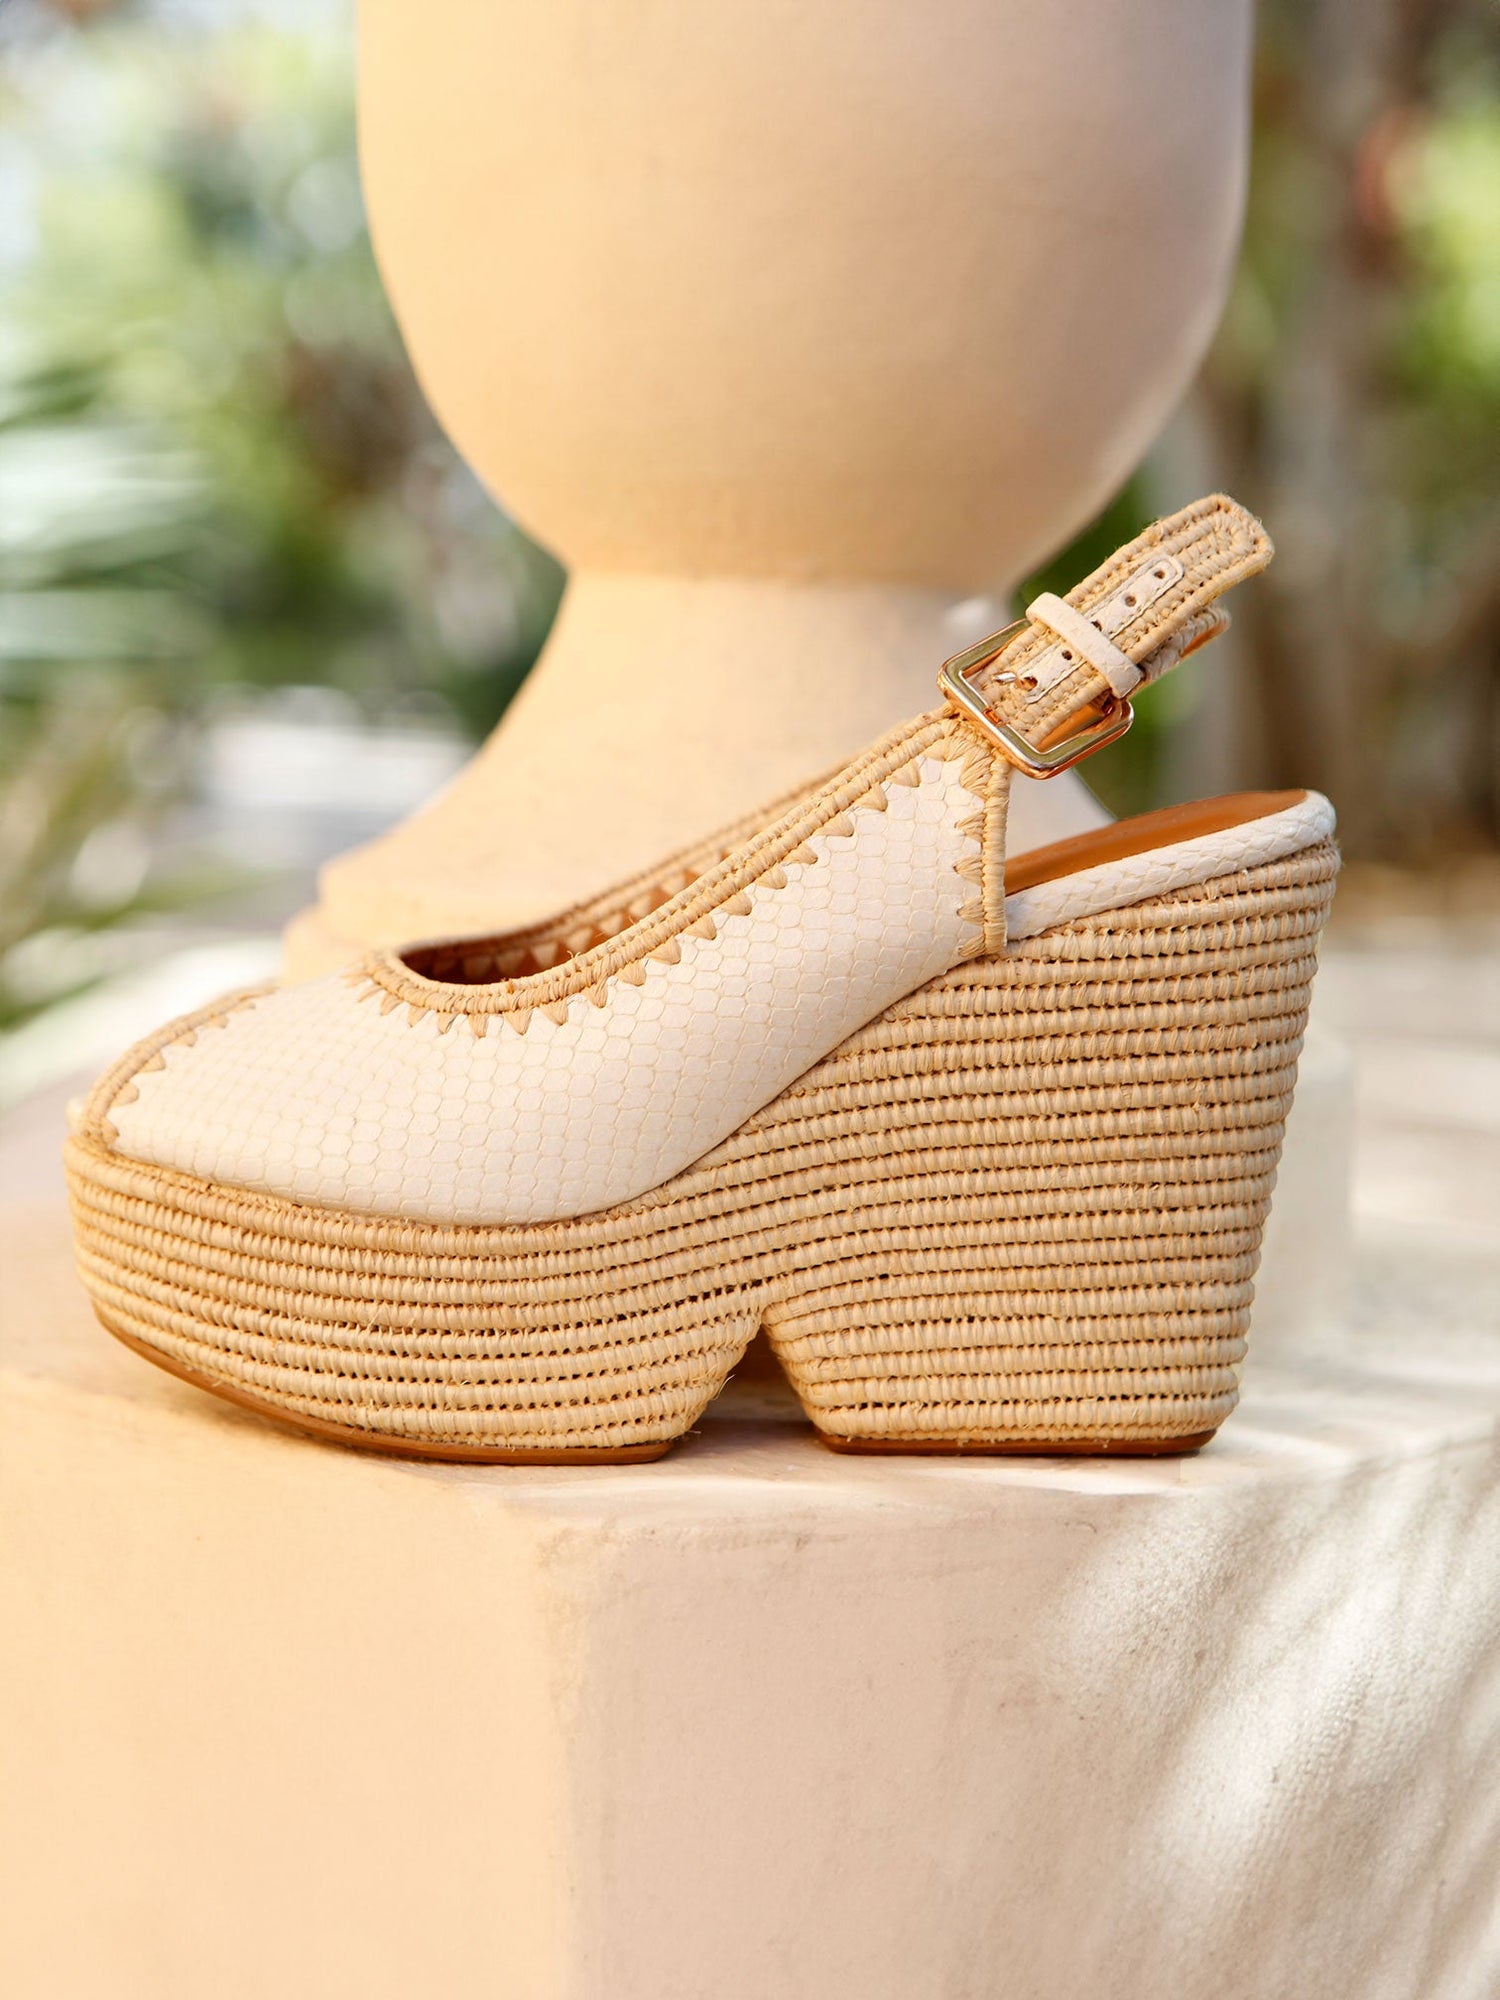 WEDGES - DYLAN wedges, white python effect - DYLANSRCHIDCAM350 - Clergerie Paris - USA